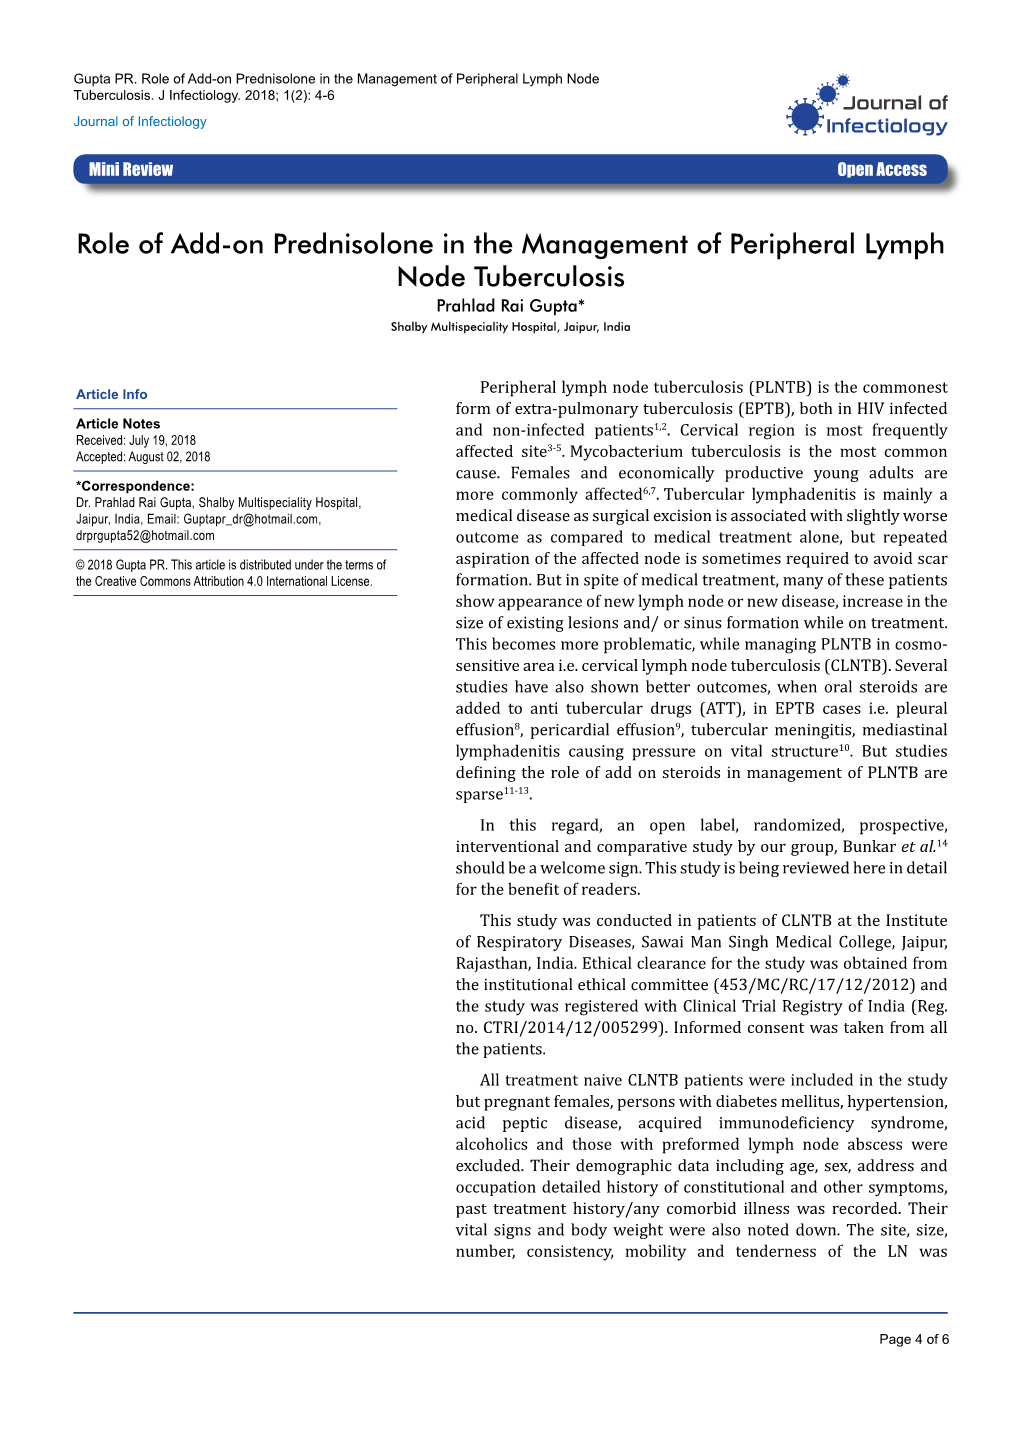 Role of Add-On Prednisolone in the Management of Peripheral Lymph Node Tuberculosis